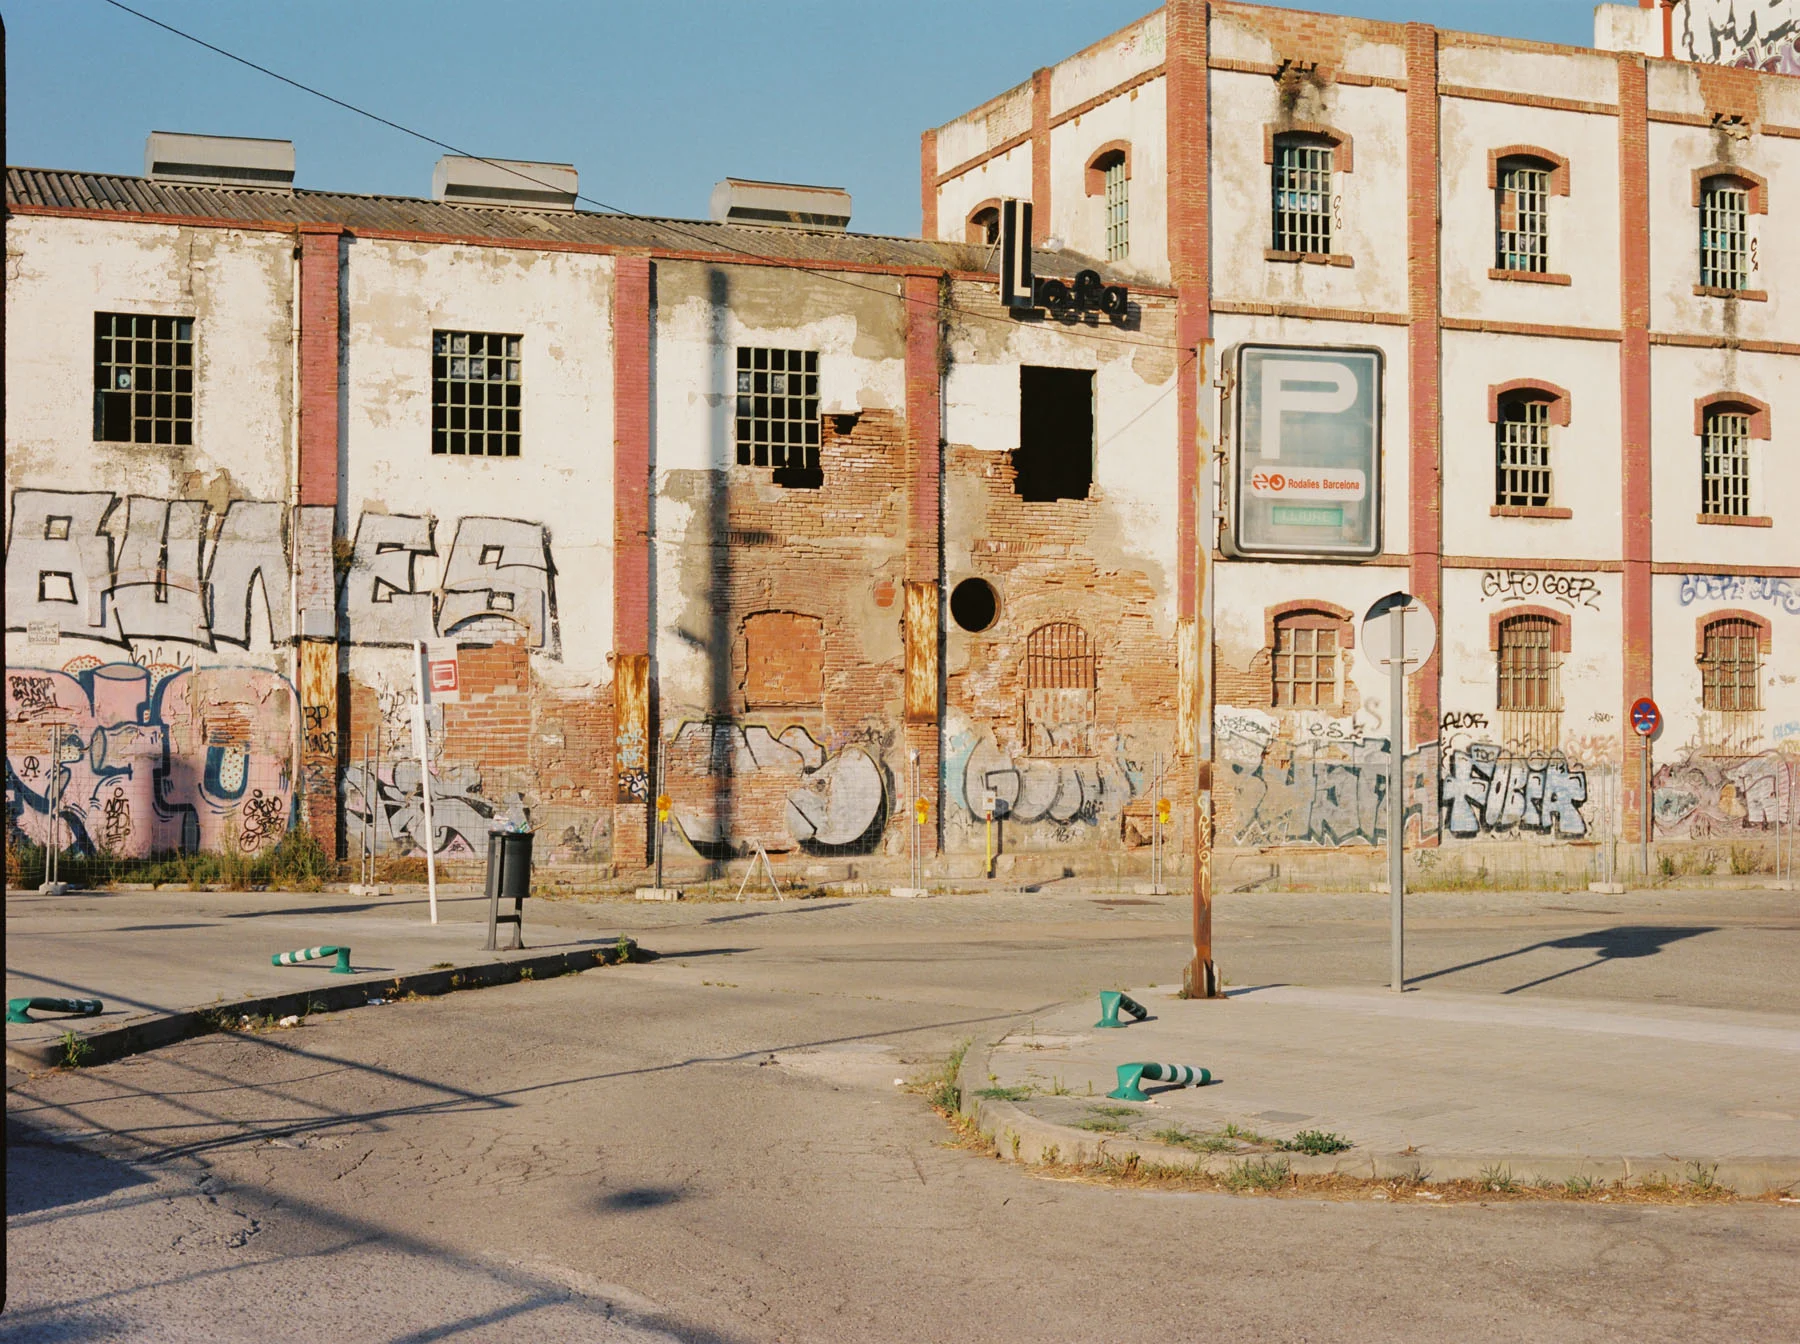 A photograph of an abandoned warehouse. The walls of the warehouse are painted with graffiti. There is also a parking sign which pointing to the train station beside the warehouse.